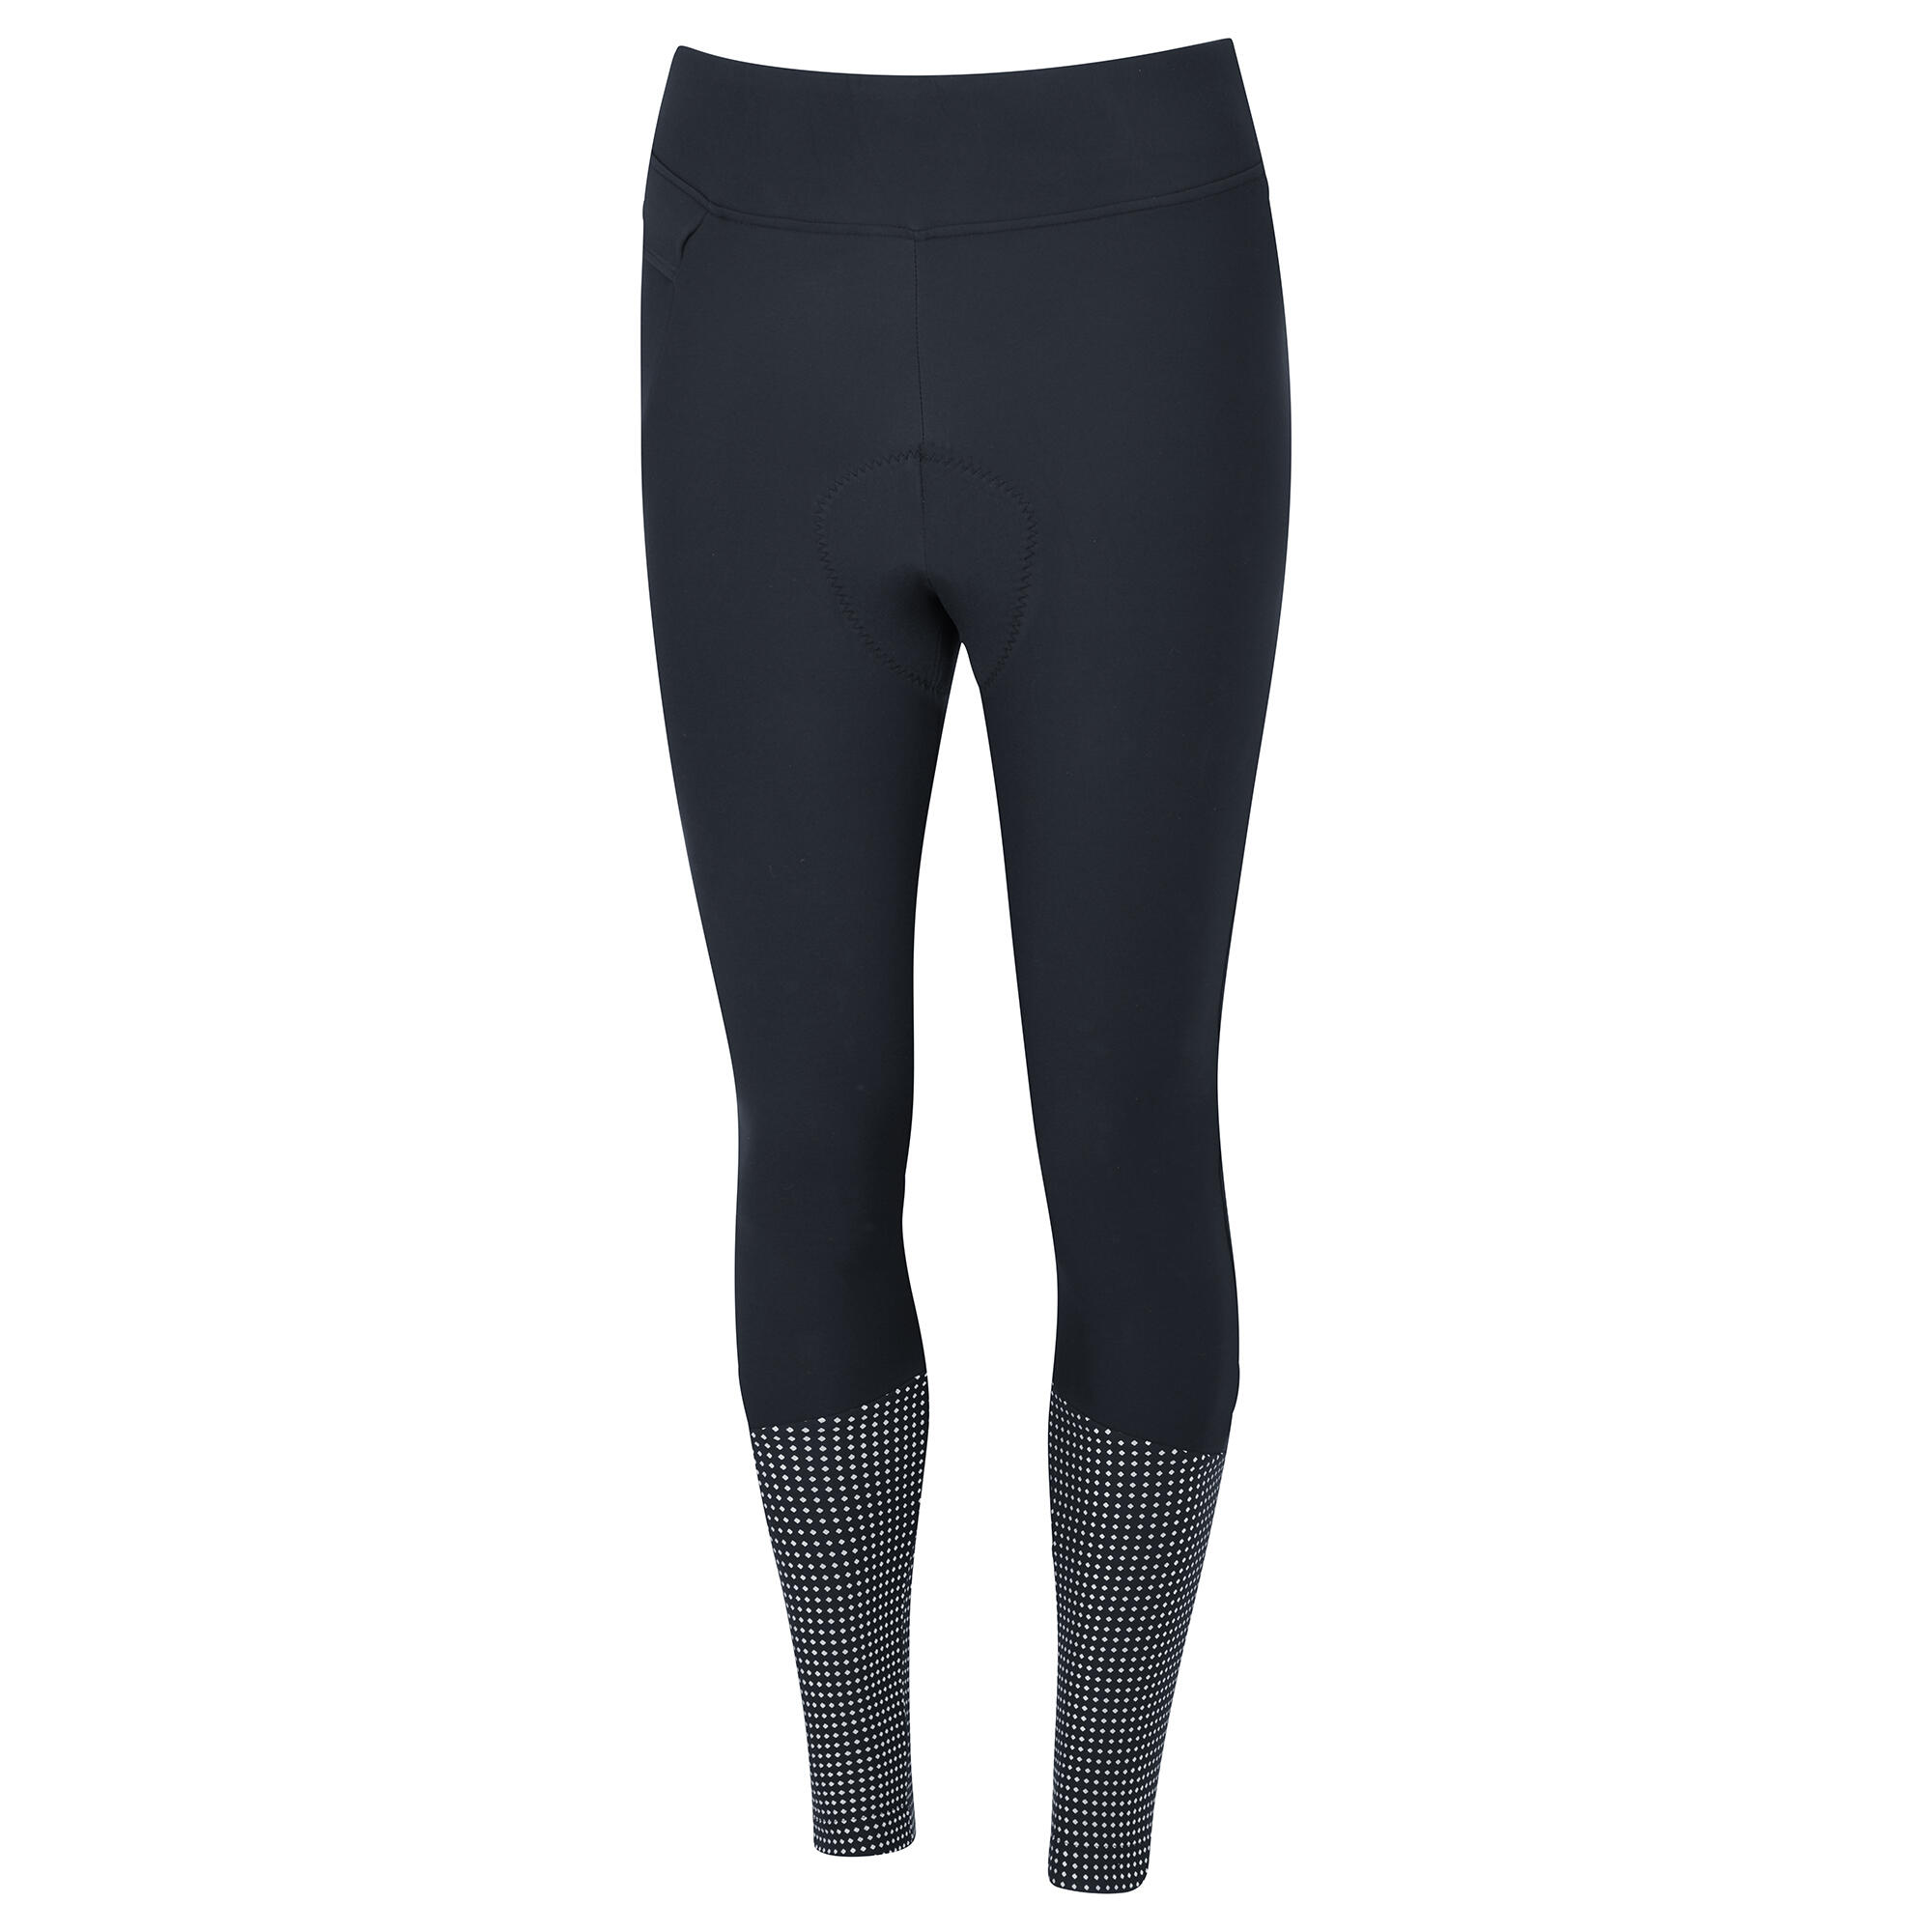 Nightvision Dwr Women's Cycling Waist Tights 4/5